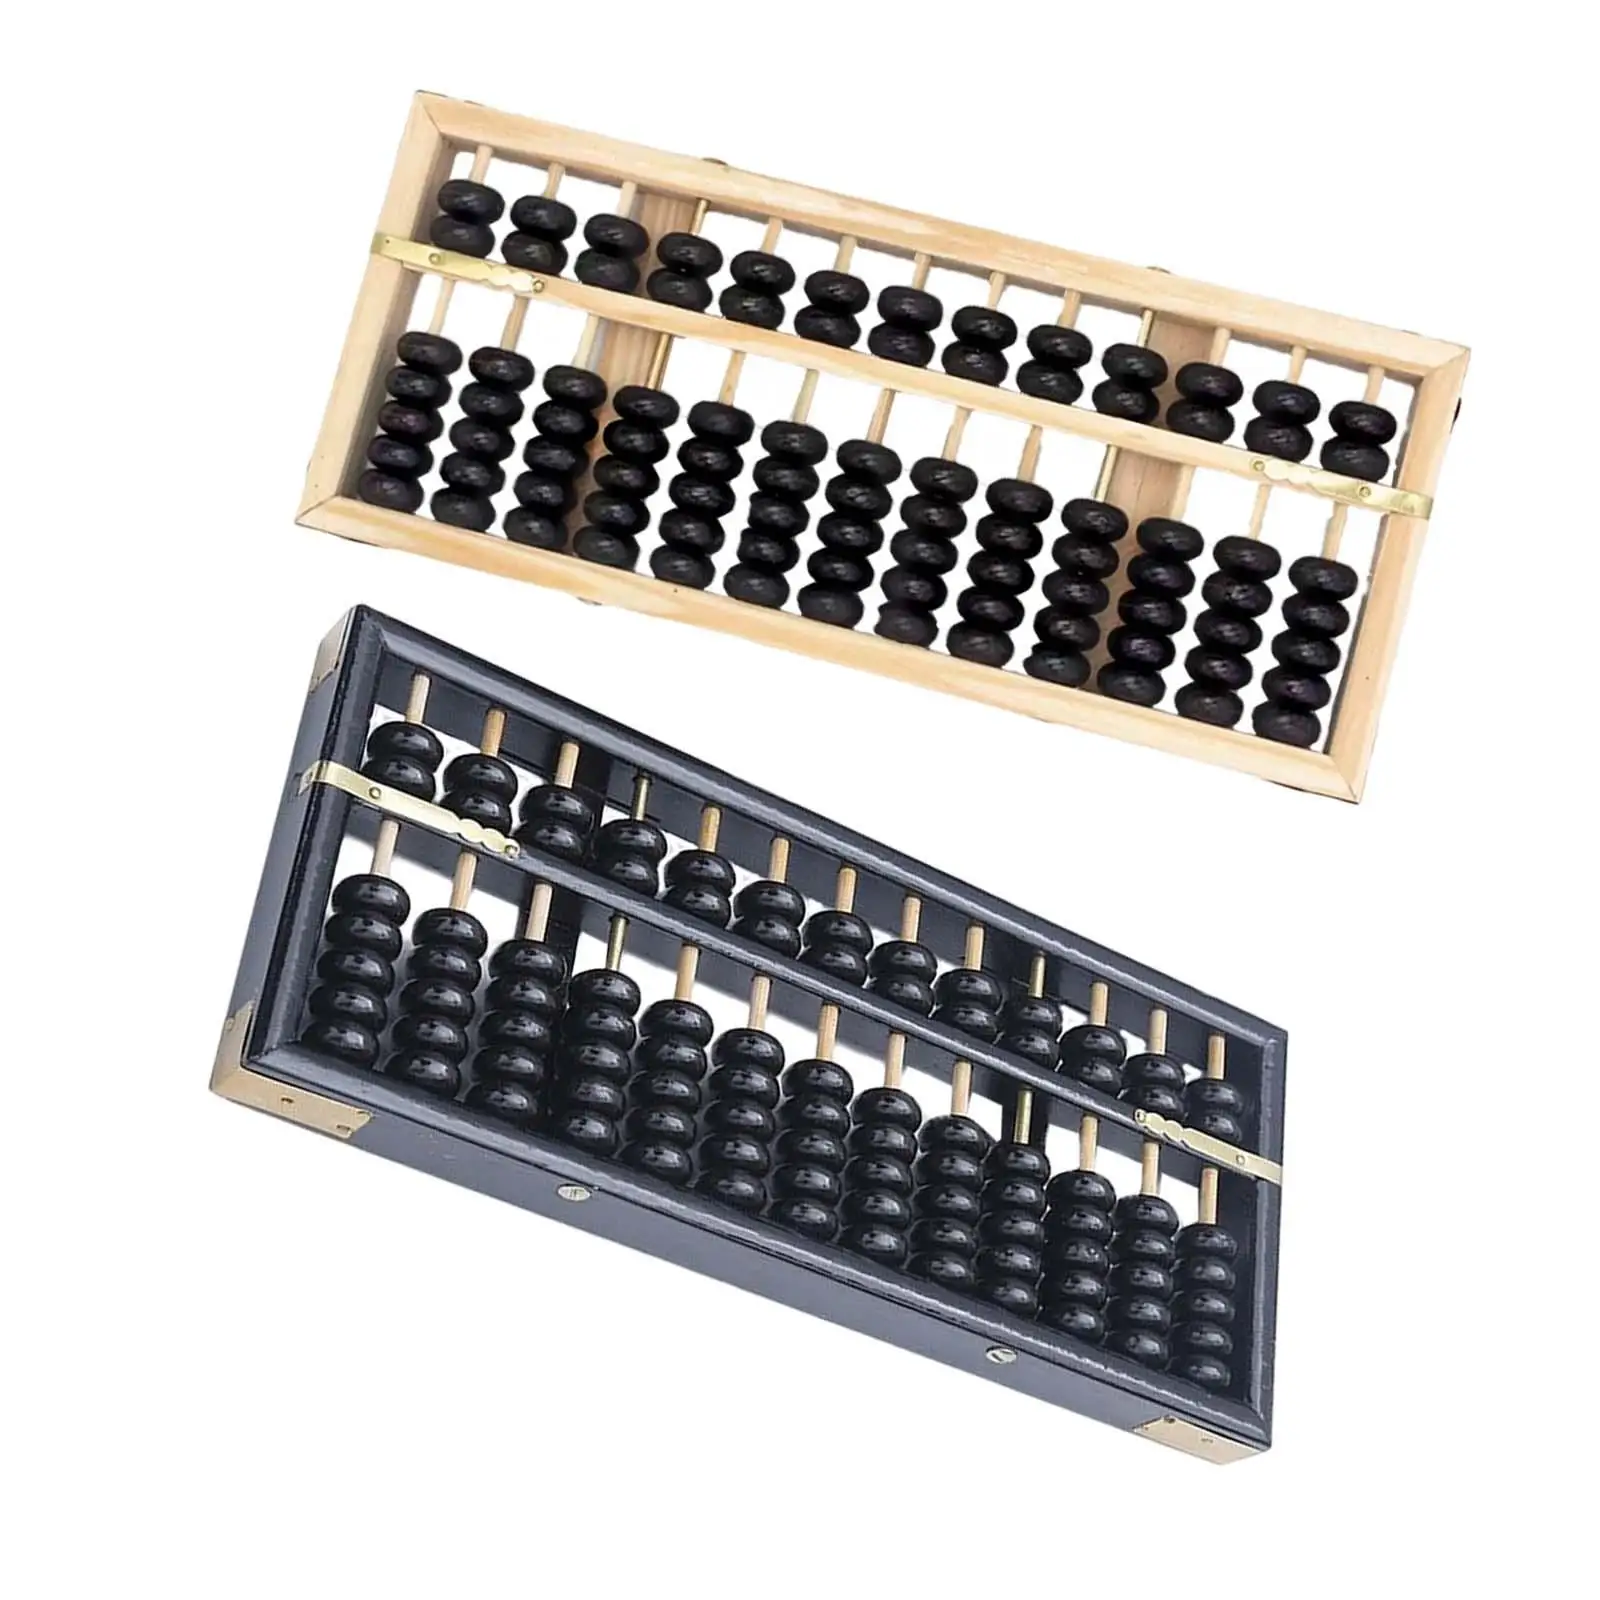 3 digits Rods Vintage Style Wooden Abacus Educational Tools Chinese Calculator Wood Bead Arithmetic Soroban for Adults Kids